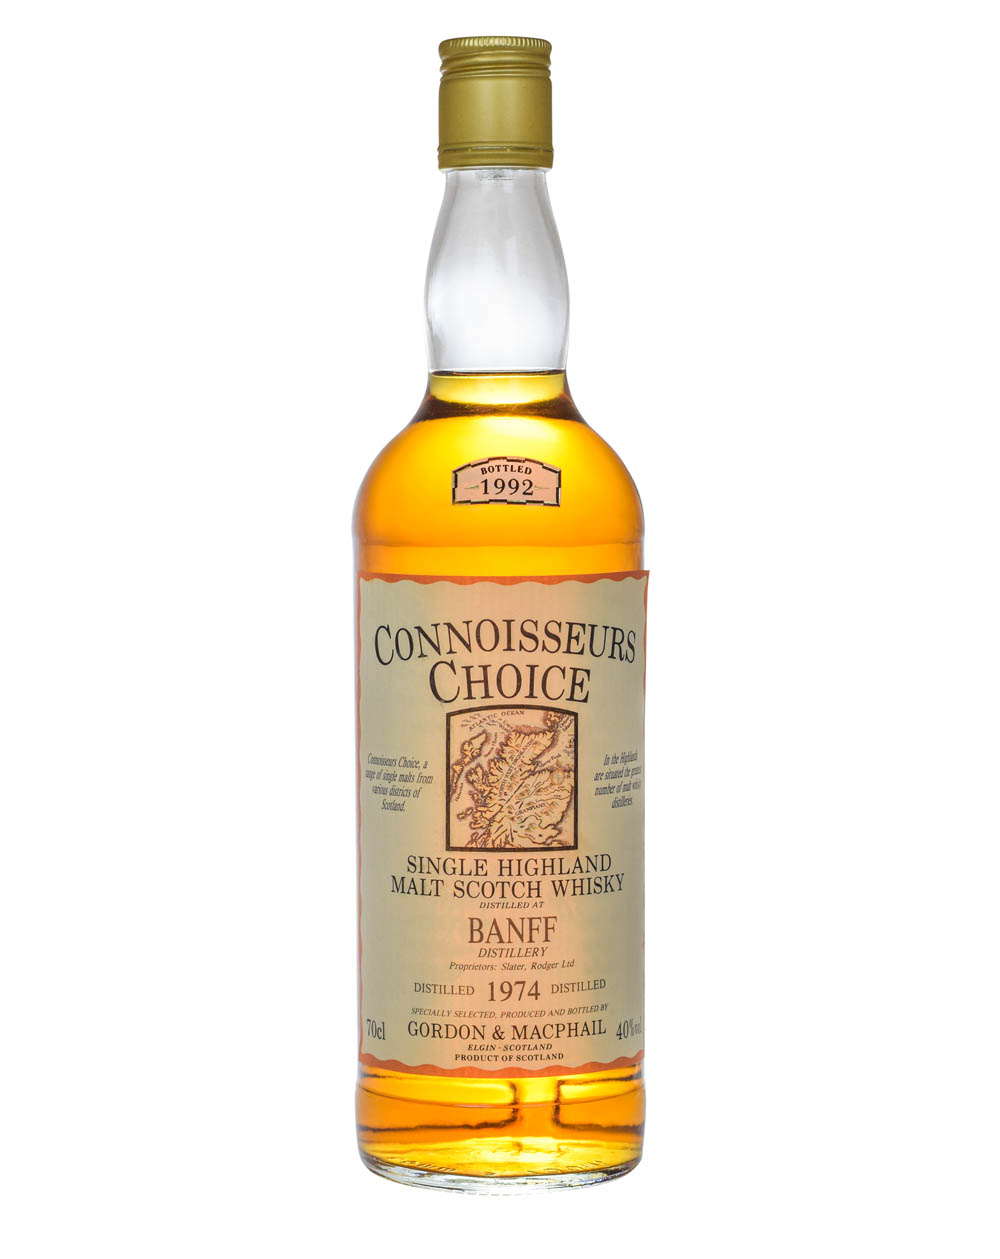 Banff 1974-1992 Connoisseur's Choice Musthave Malts MHM